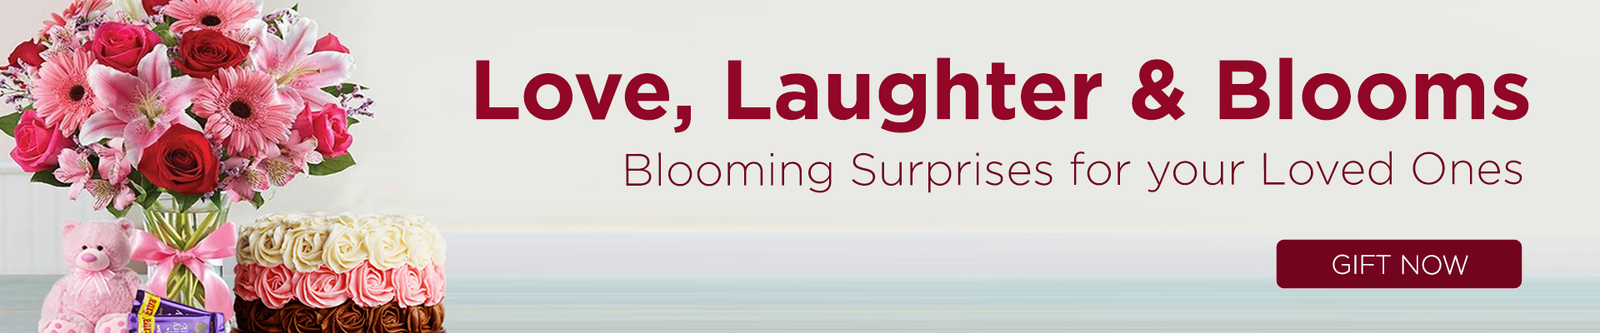 LOVE LAUGHTER BLOOM 2